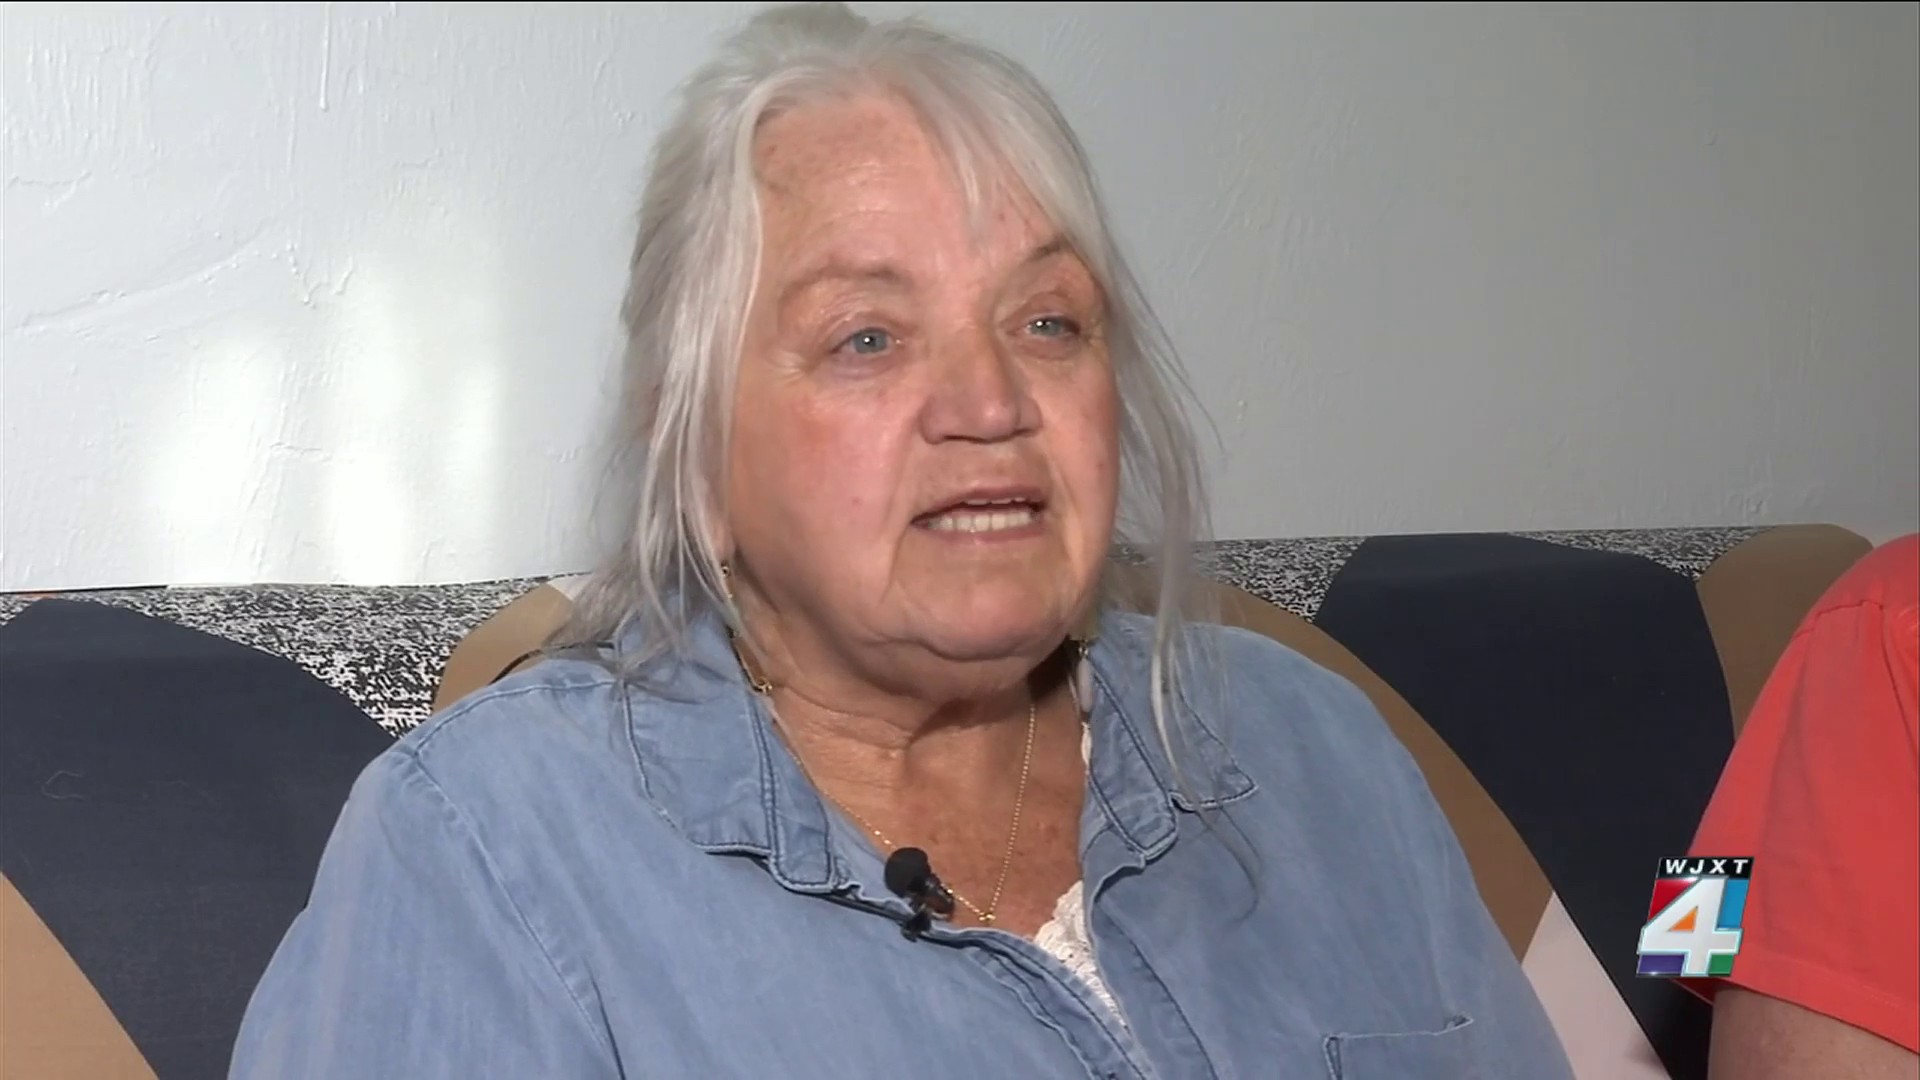 Charge dropped for grandmother who refused to leave daughter’s side at hospital